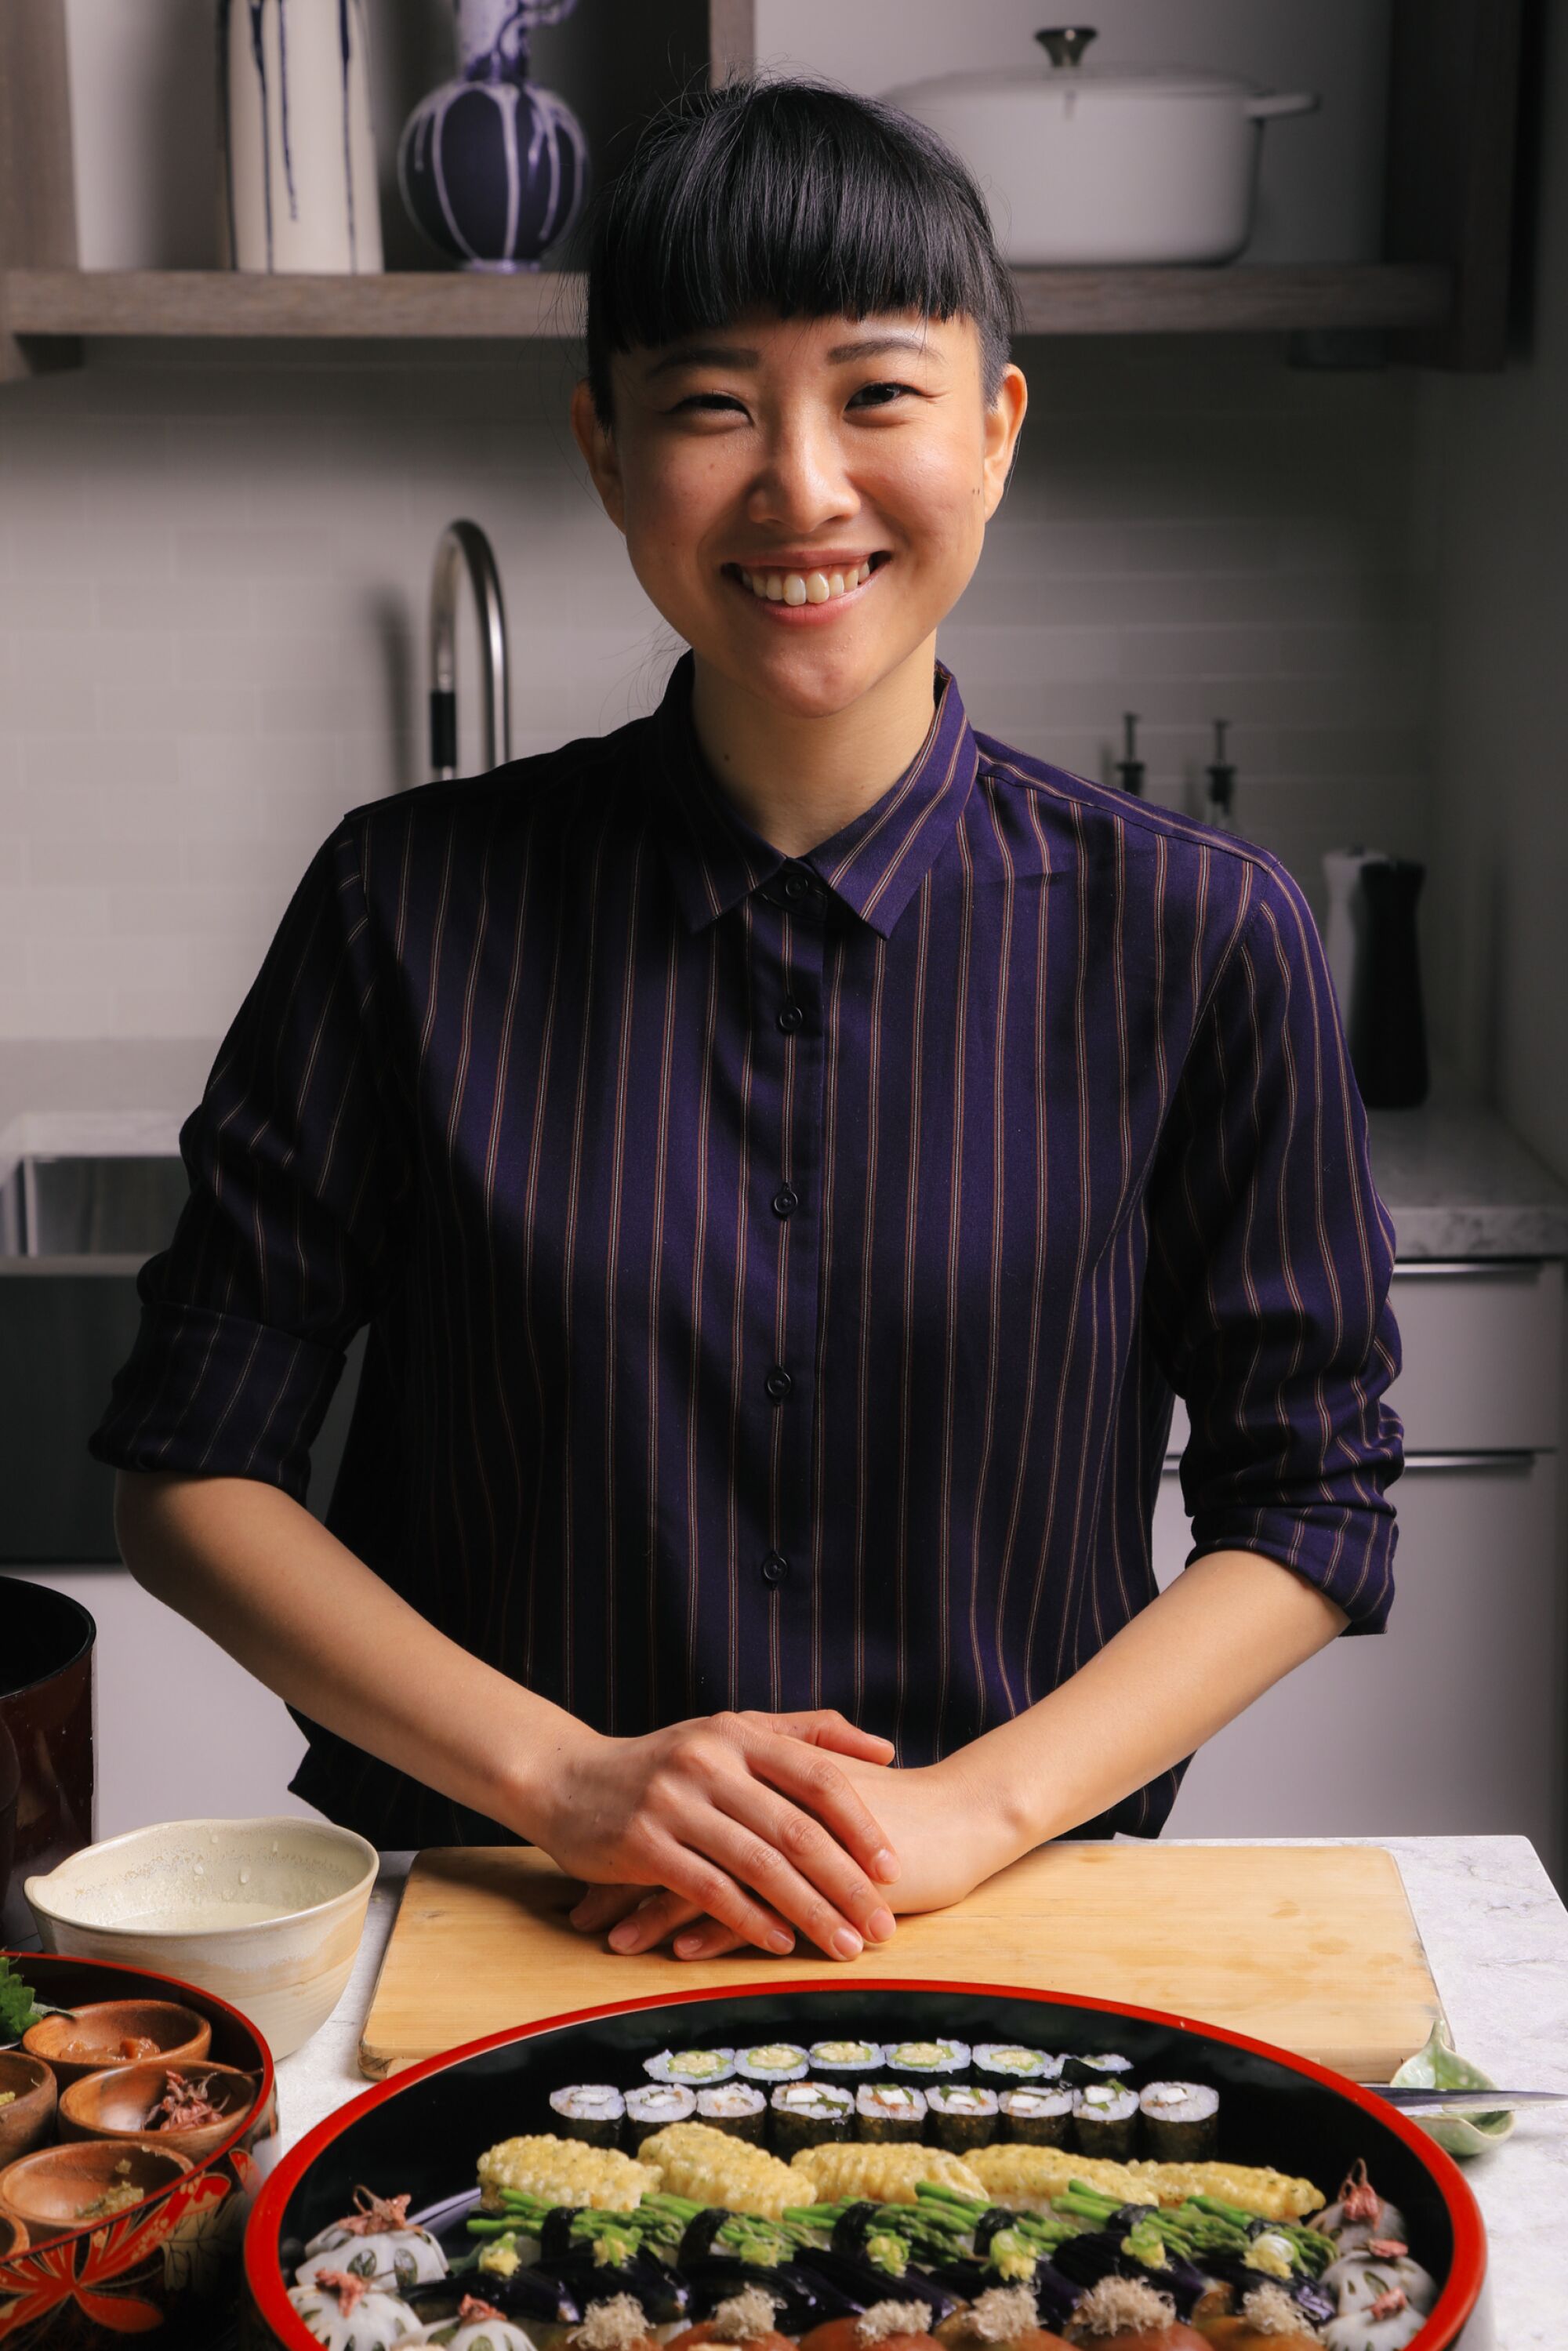 A portrait of chef Yoko Hasebe with a platter of her vegan sushi.